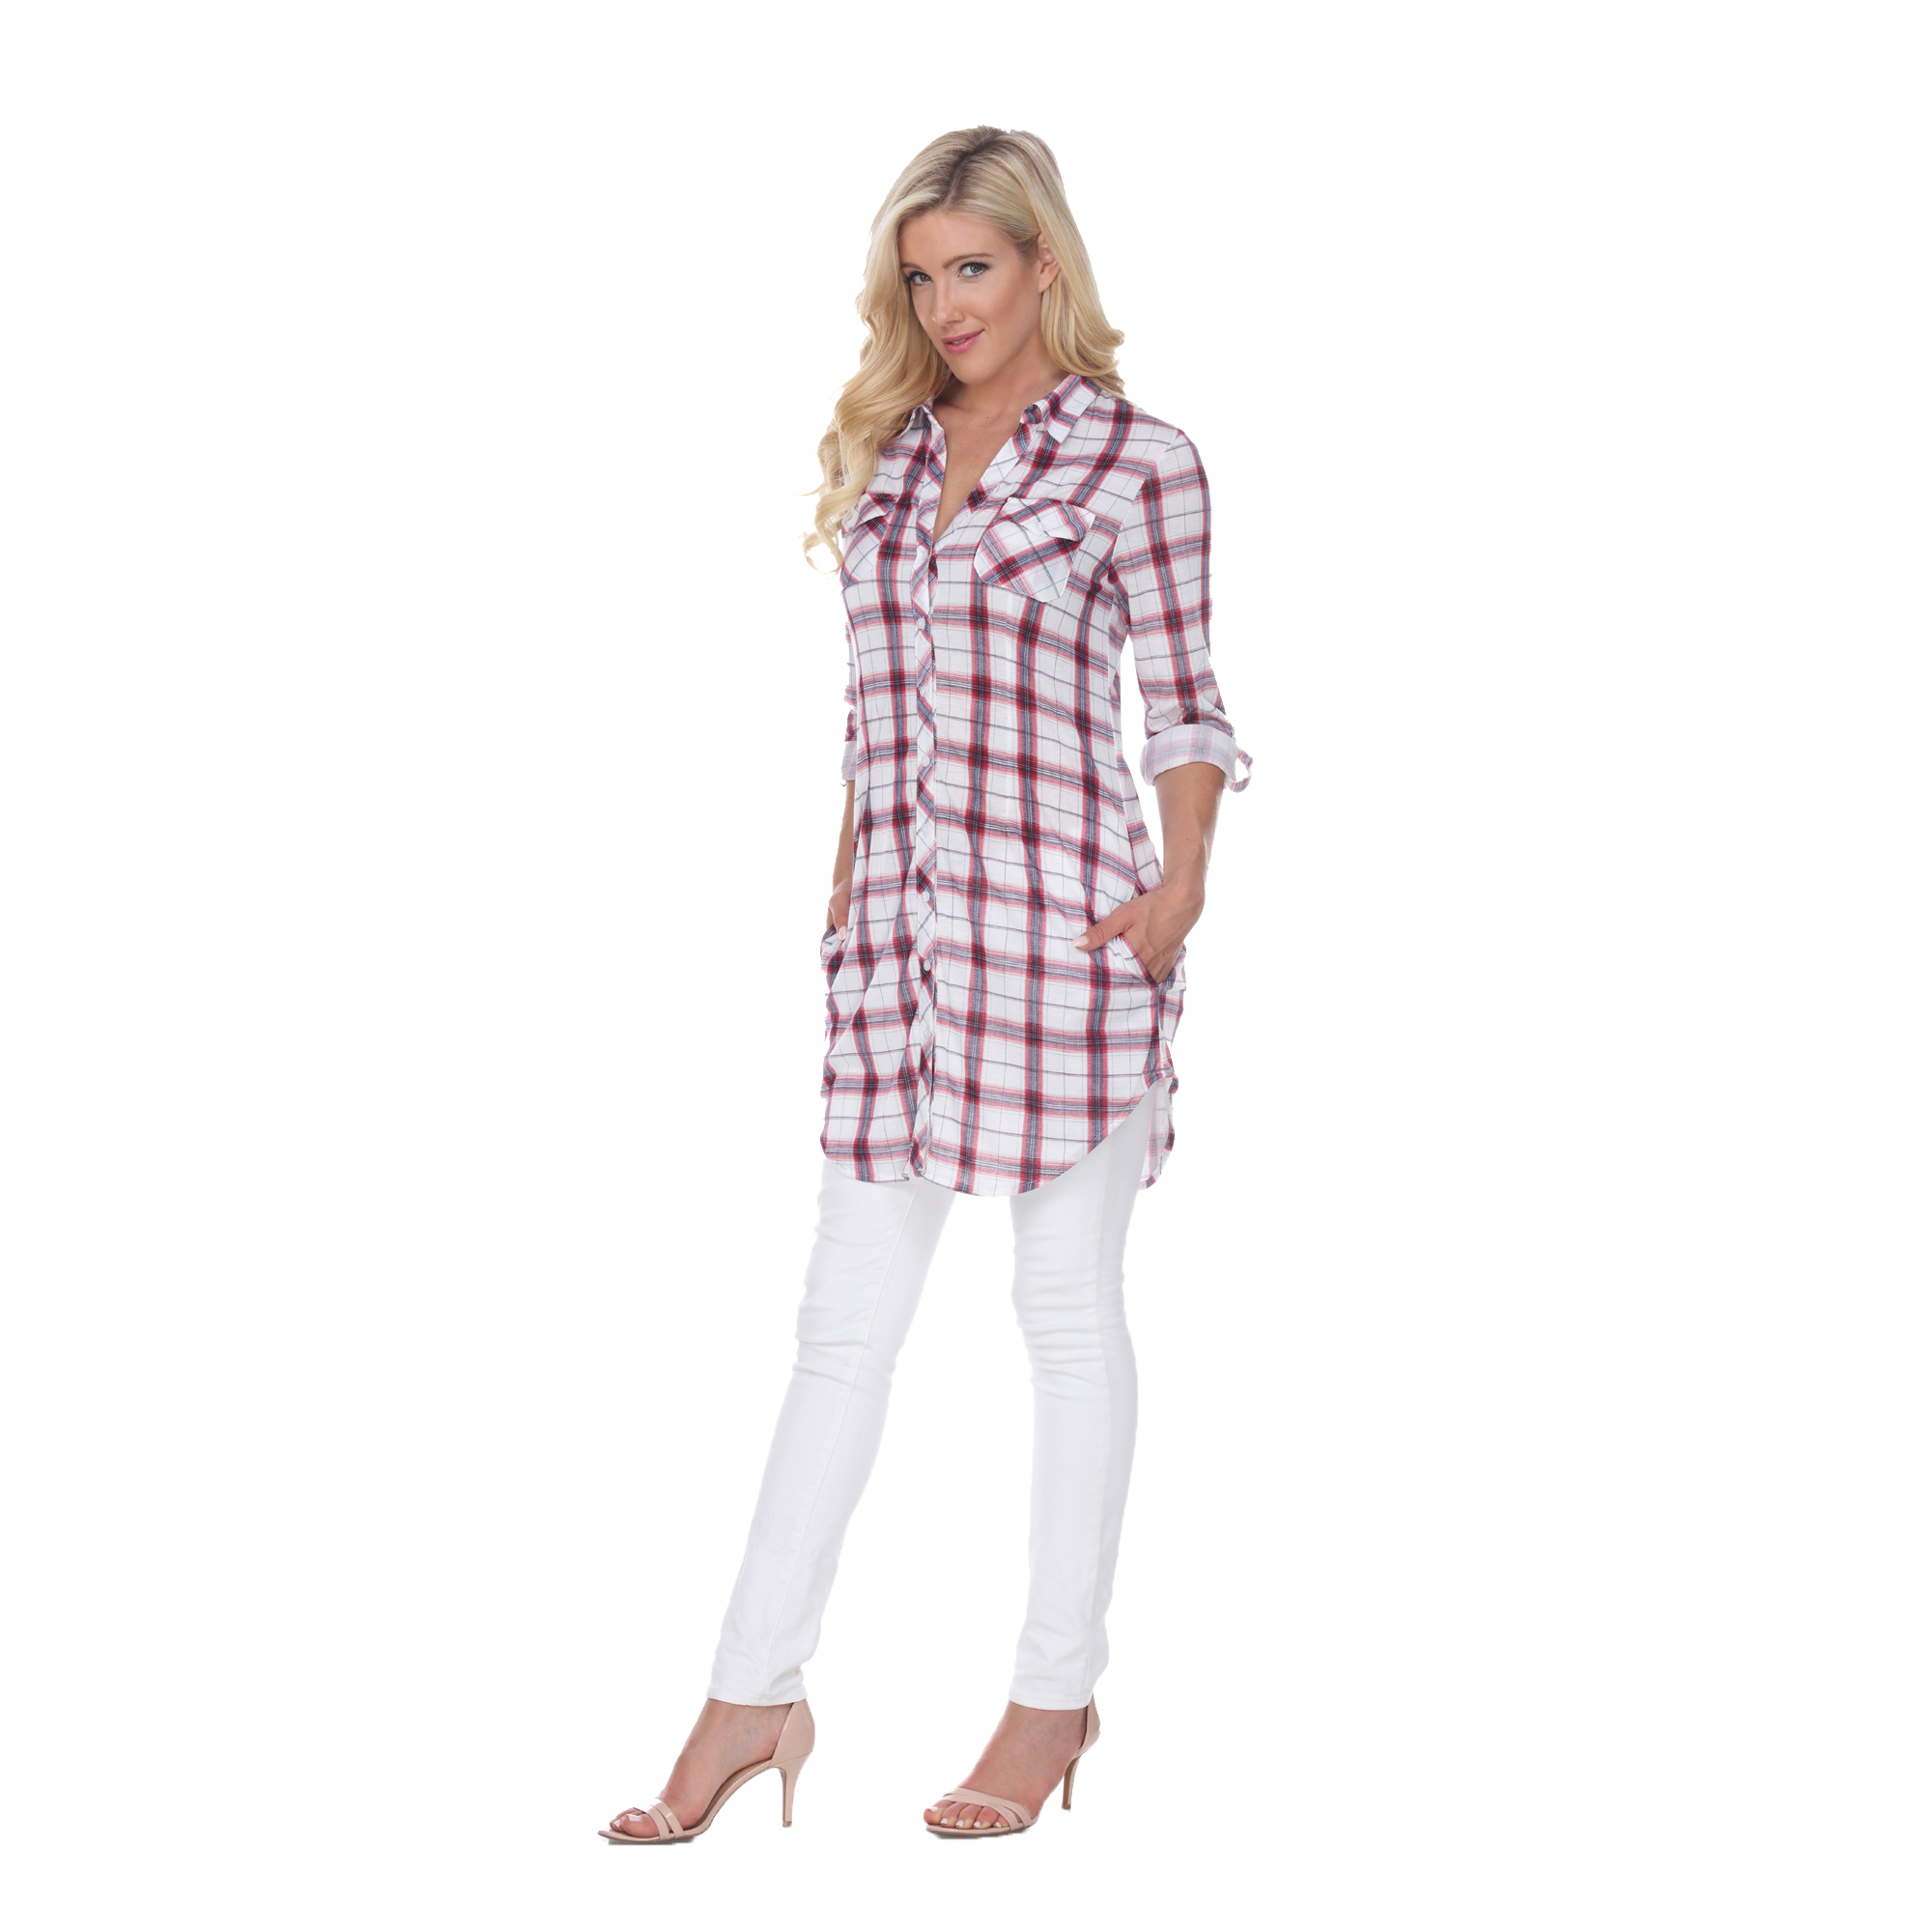 White Mark Women's Stretchy Plaid Flannel Tunic Top - Red/White, 2X